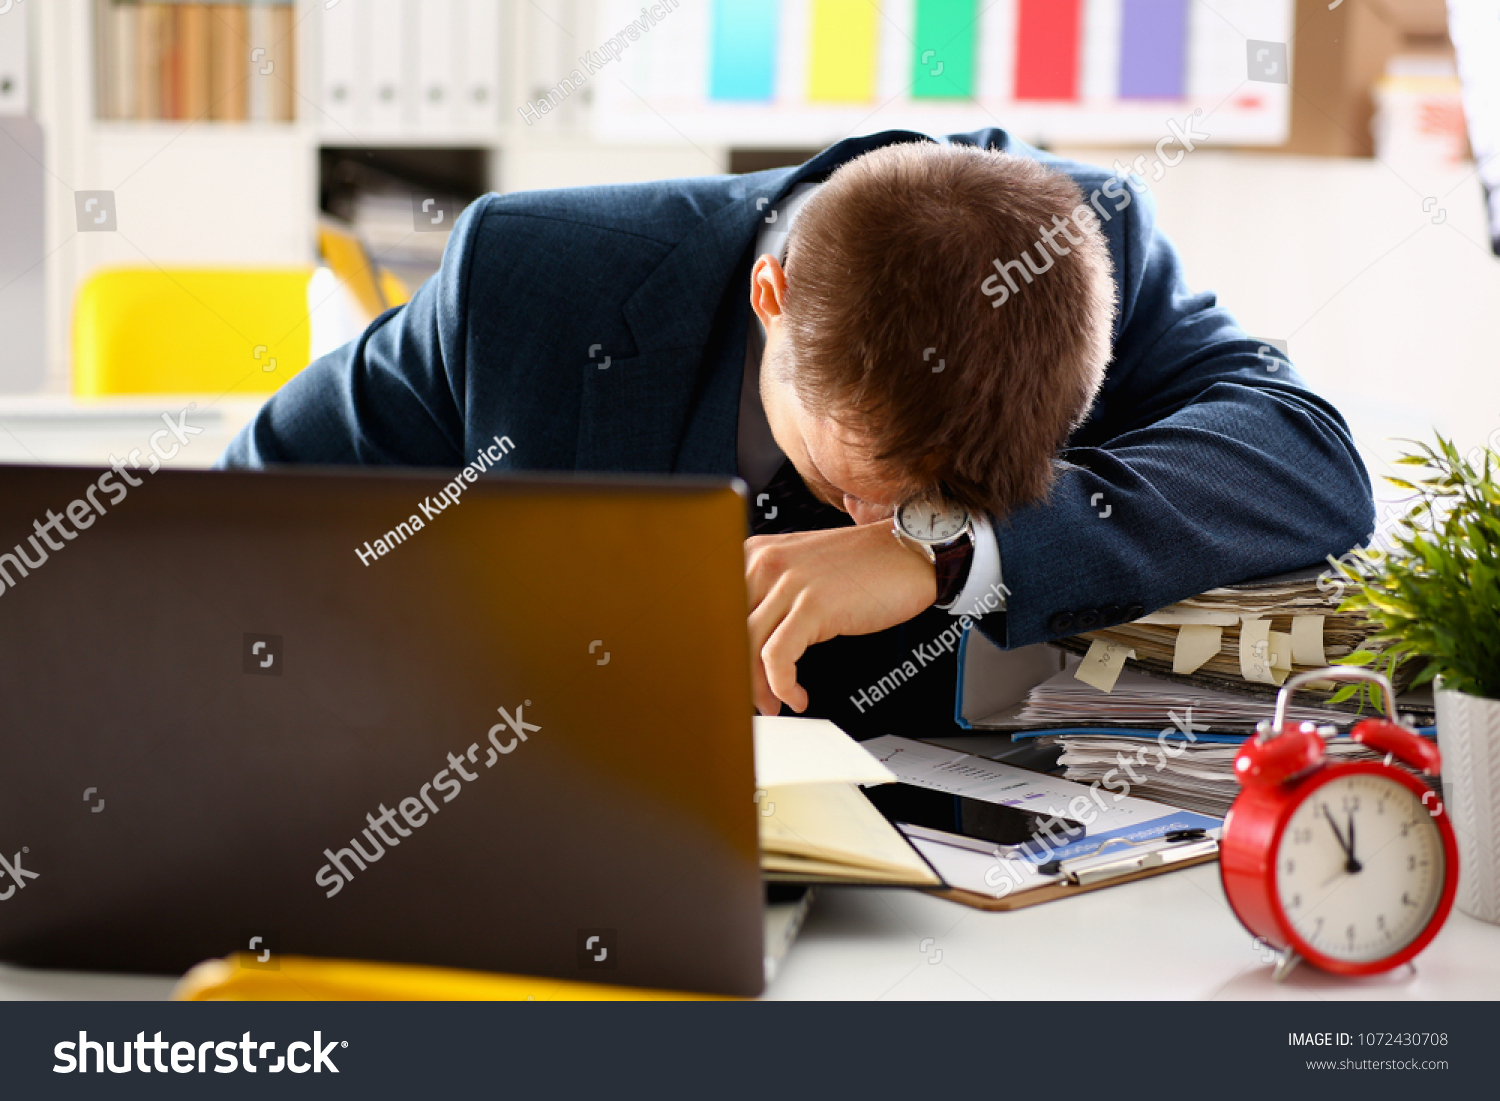 Red alarm clock shows late time closeup and tired office male clerk in suit take nap on table workplace full of exam papers. Career frustration freelance employment fail study problem low energy down #1072430708